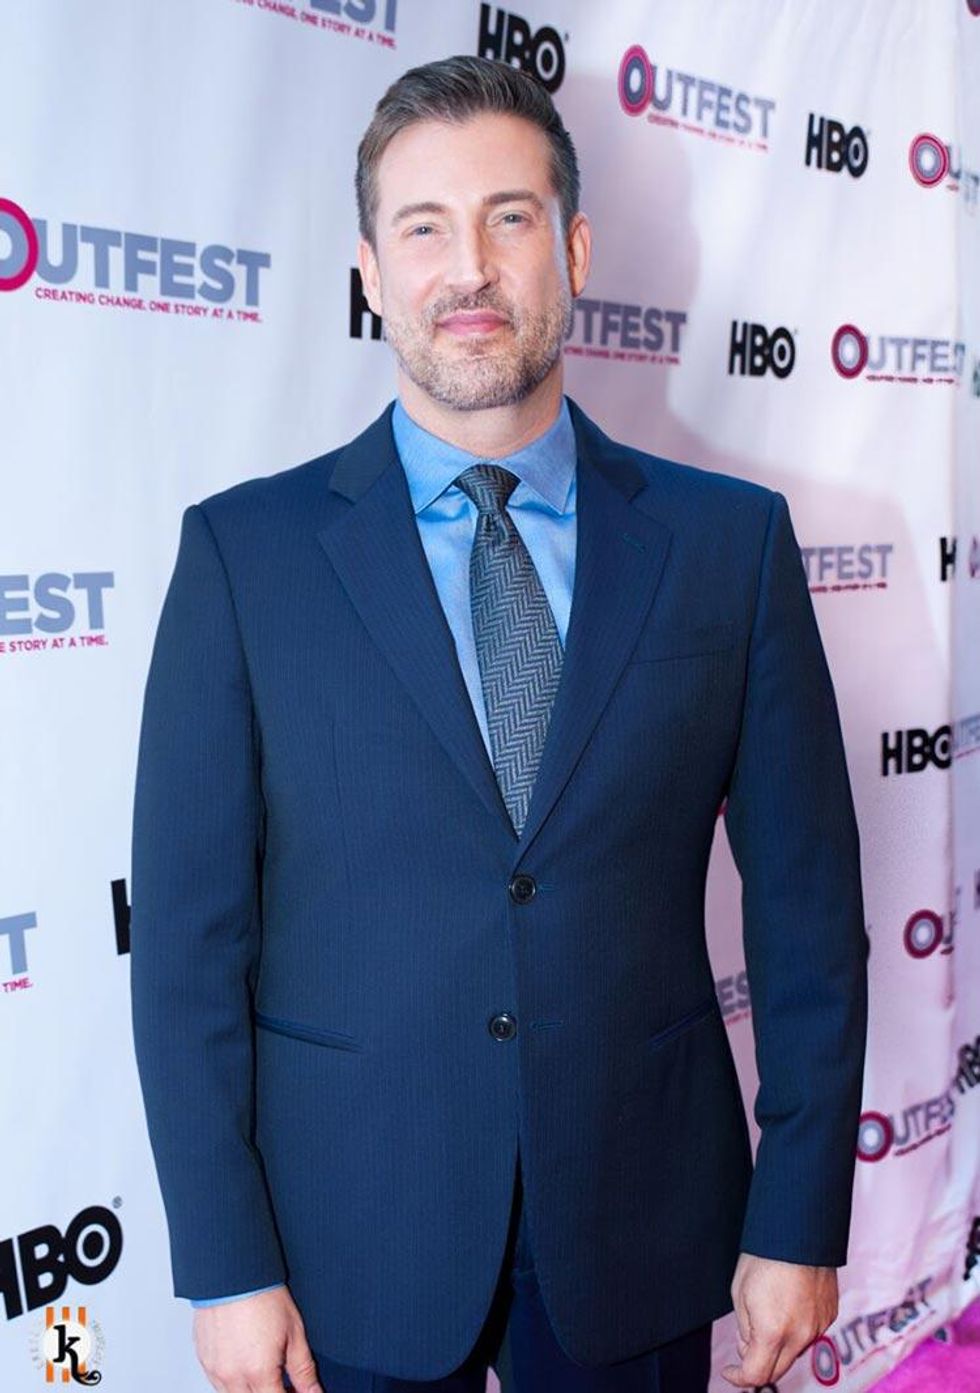 Christopher Racster, Outfest's Executive Director